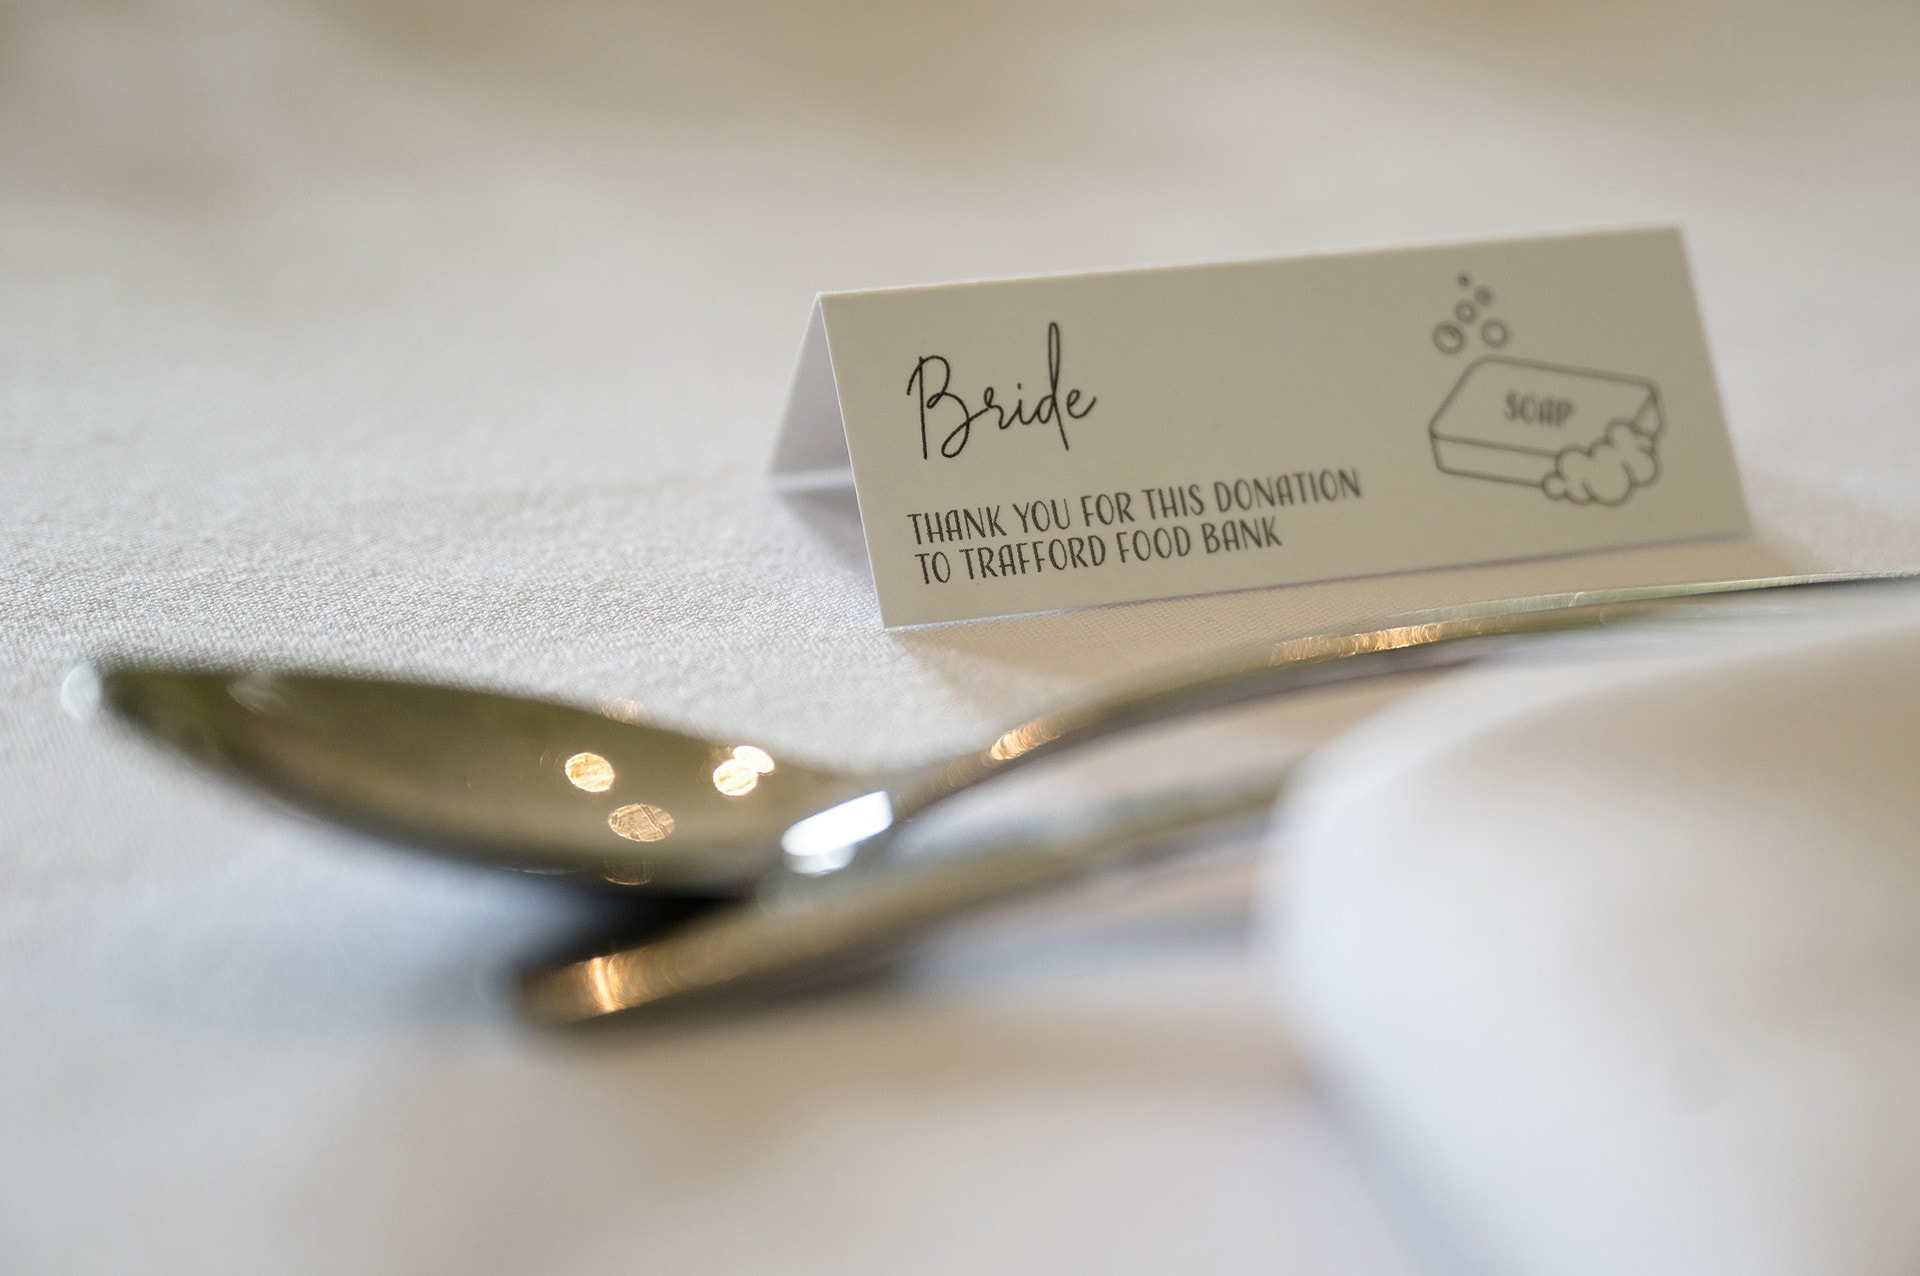 Wedding placecard showing a donation has been made to a foodbank instead of giving favours to guests